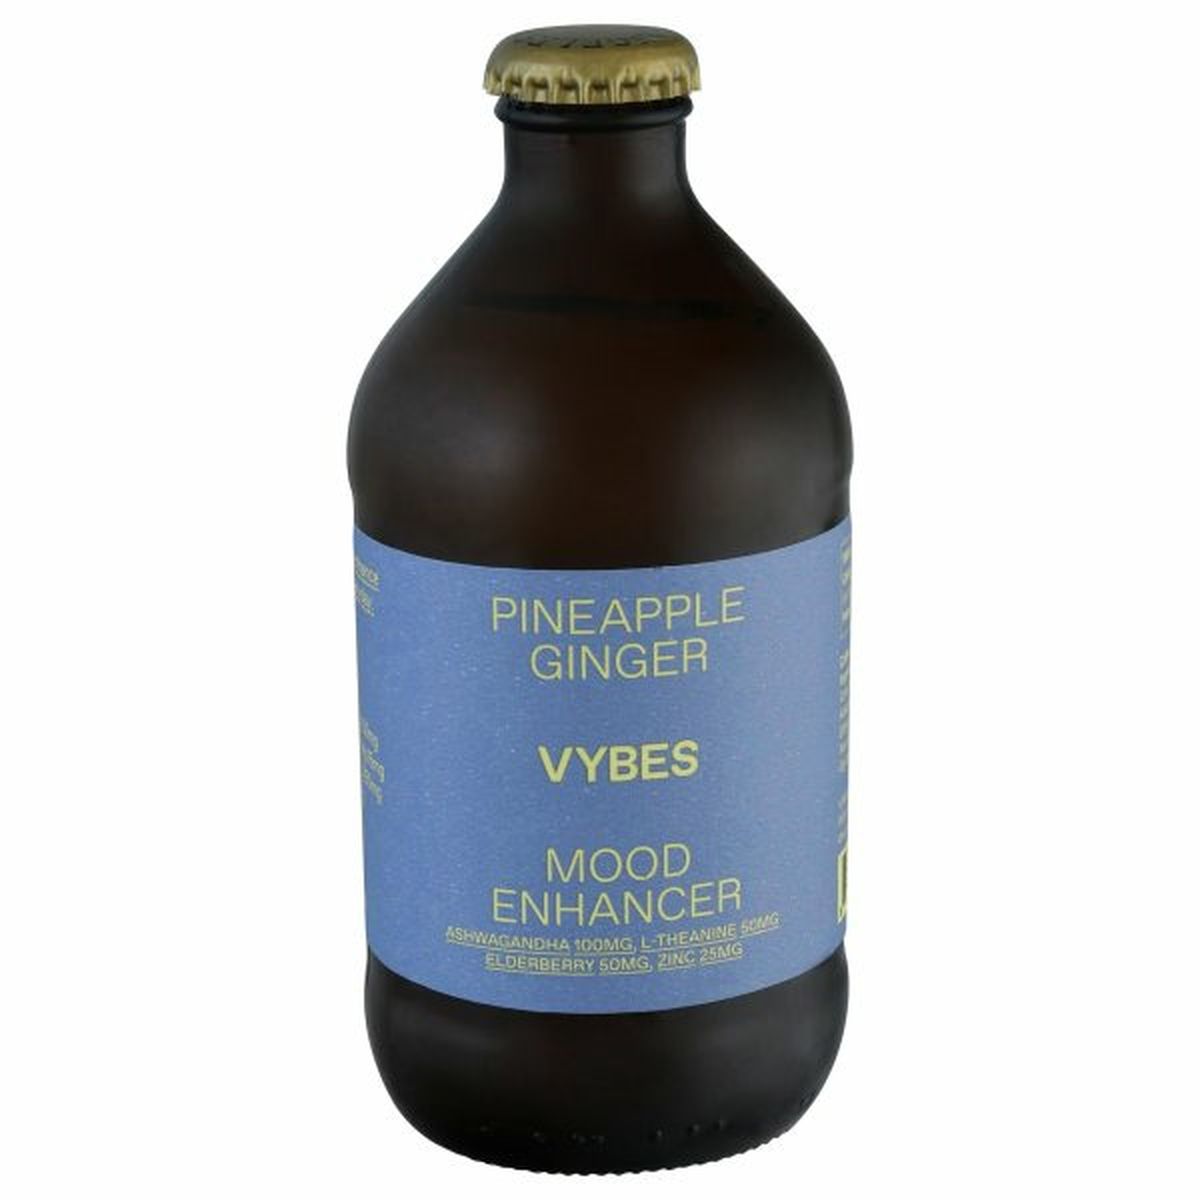 Calories in Vybes Mood Enhancer, Pineapple Ginger